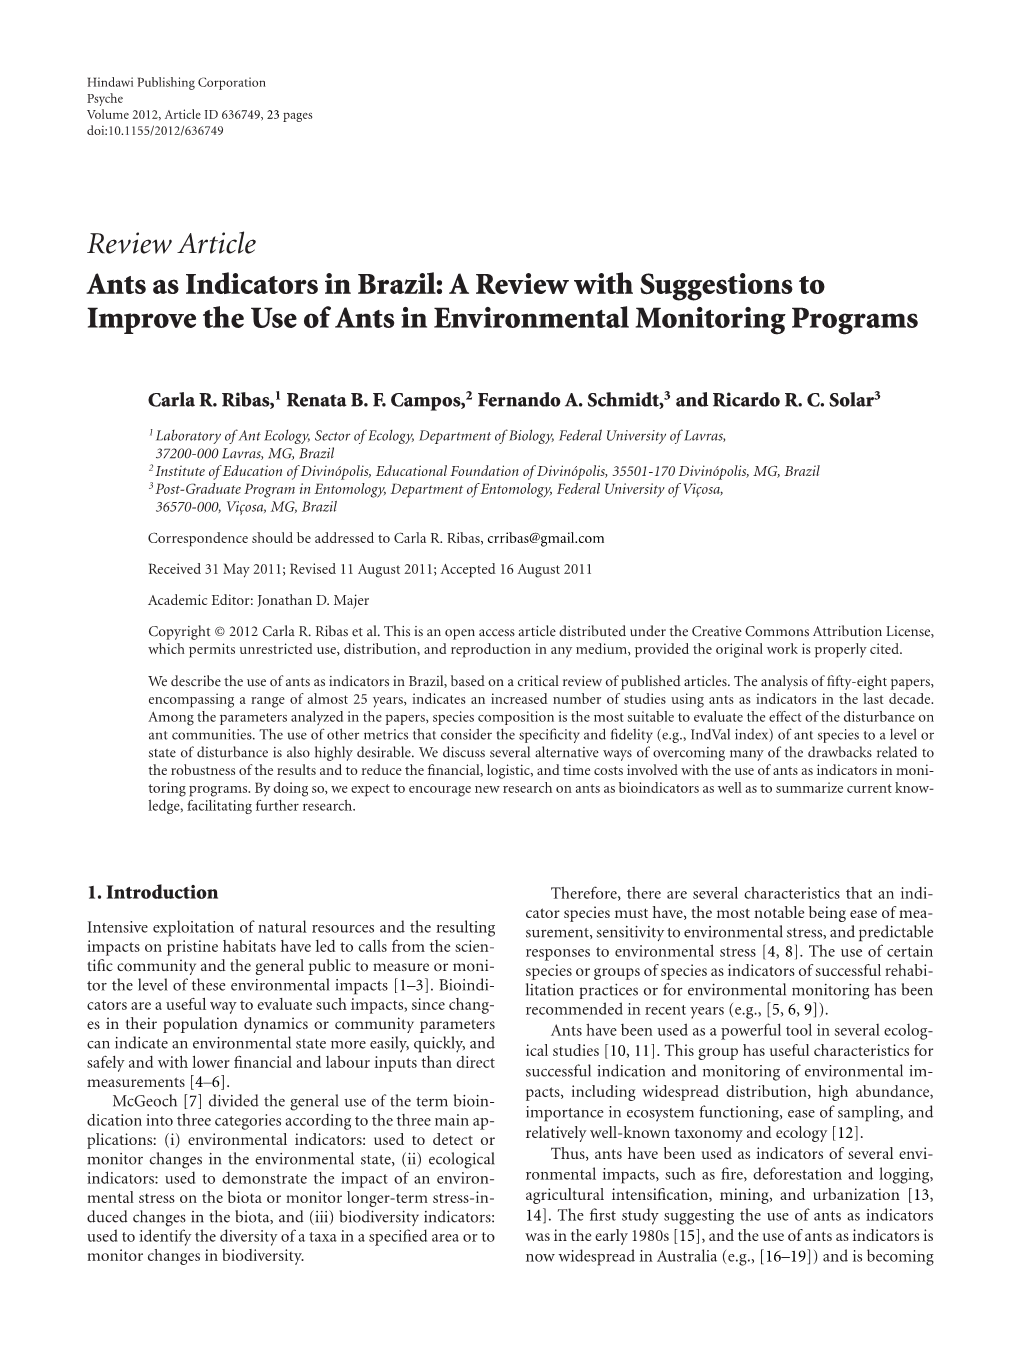 Ants As Indicators in Brazil: a Review with Suggestions to Improve the Use of Ants in Environmental Monitoring Programs